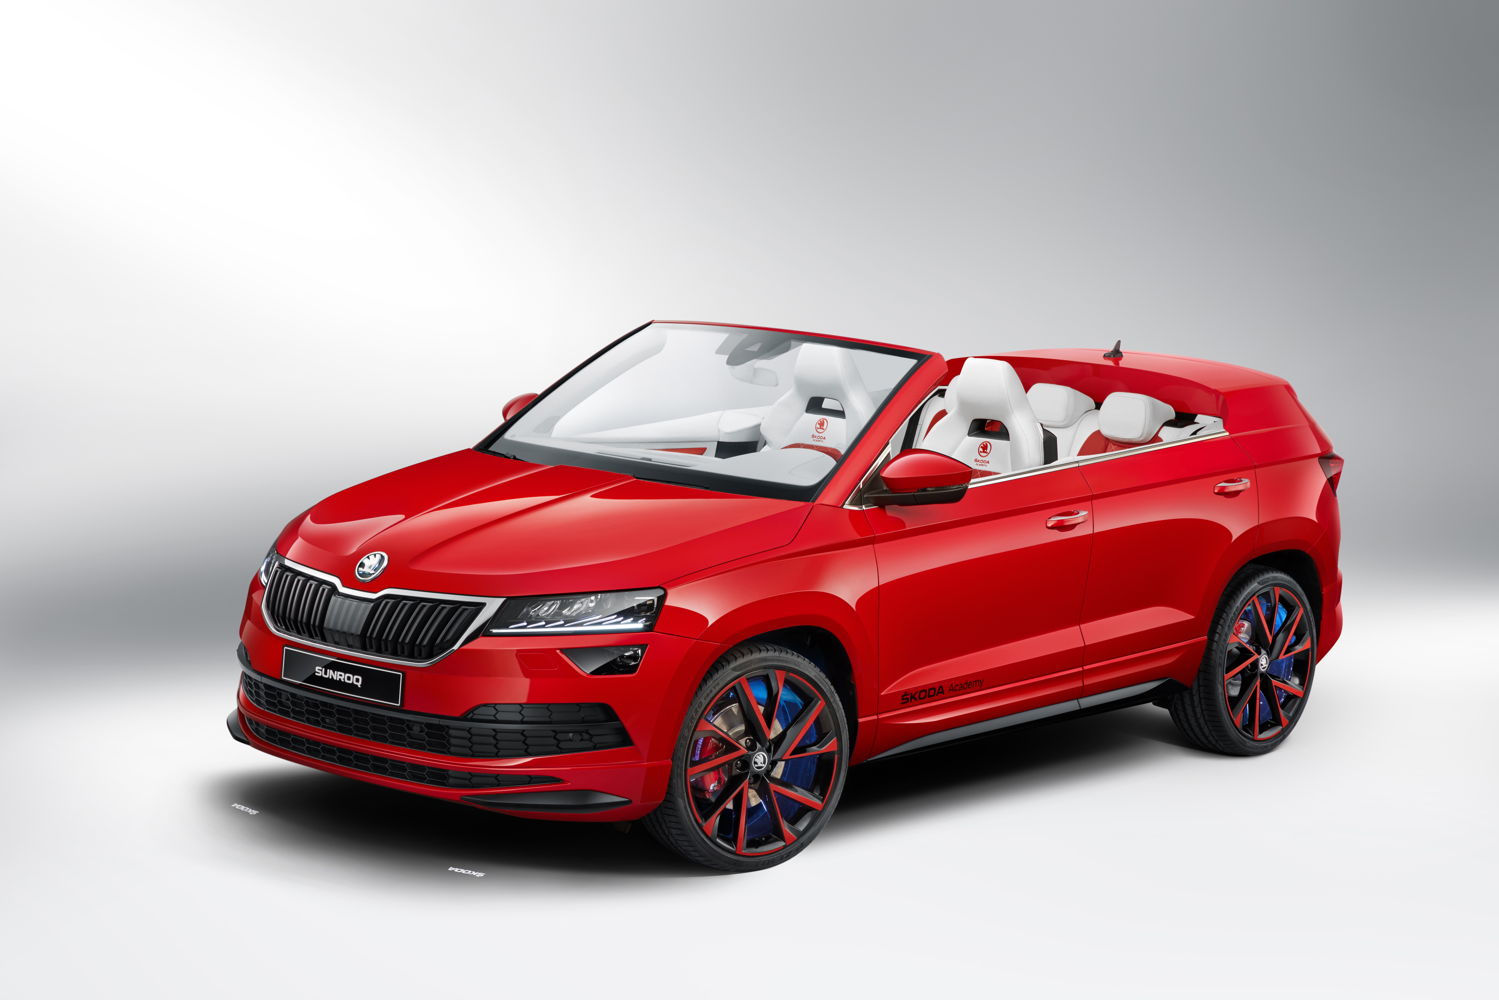 The 2018 student concept car is called ŠKODA SUNROQ. The name was chosen from among hundreds of suggestions submitted by ŠKODA customers and fans.